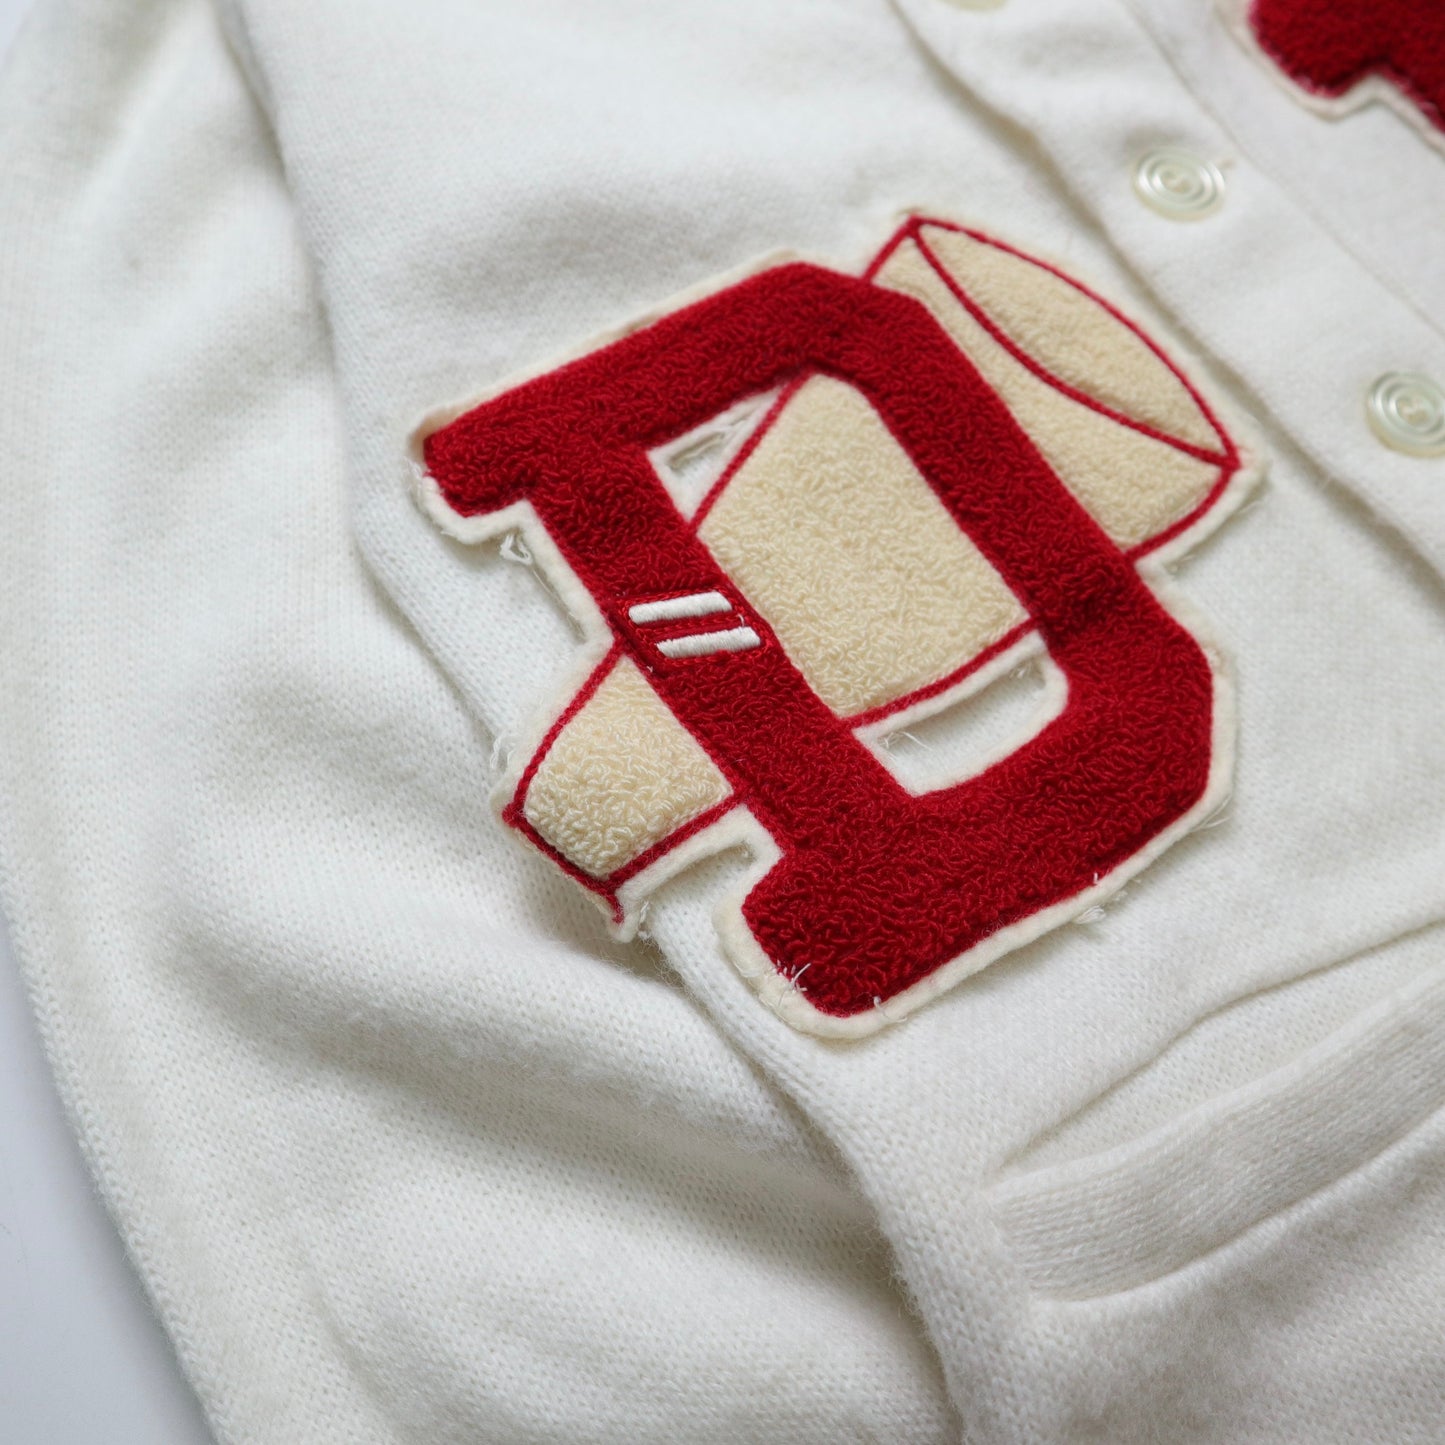 60s 70s Sand Knit white American football campus sweater Letterman Sweater